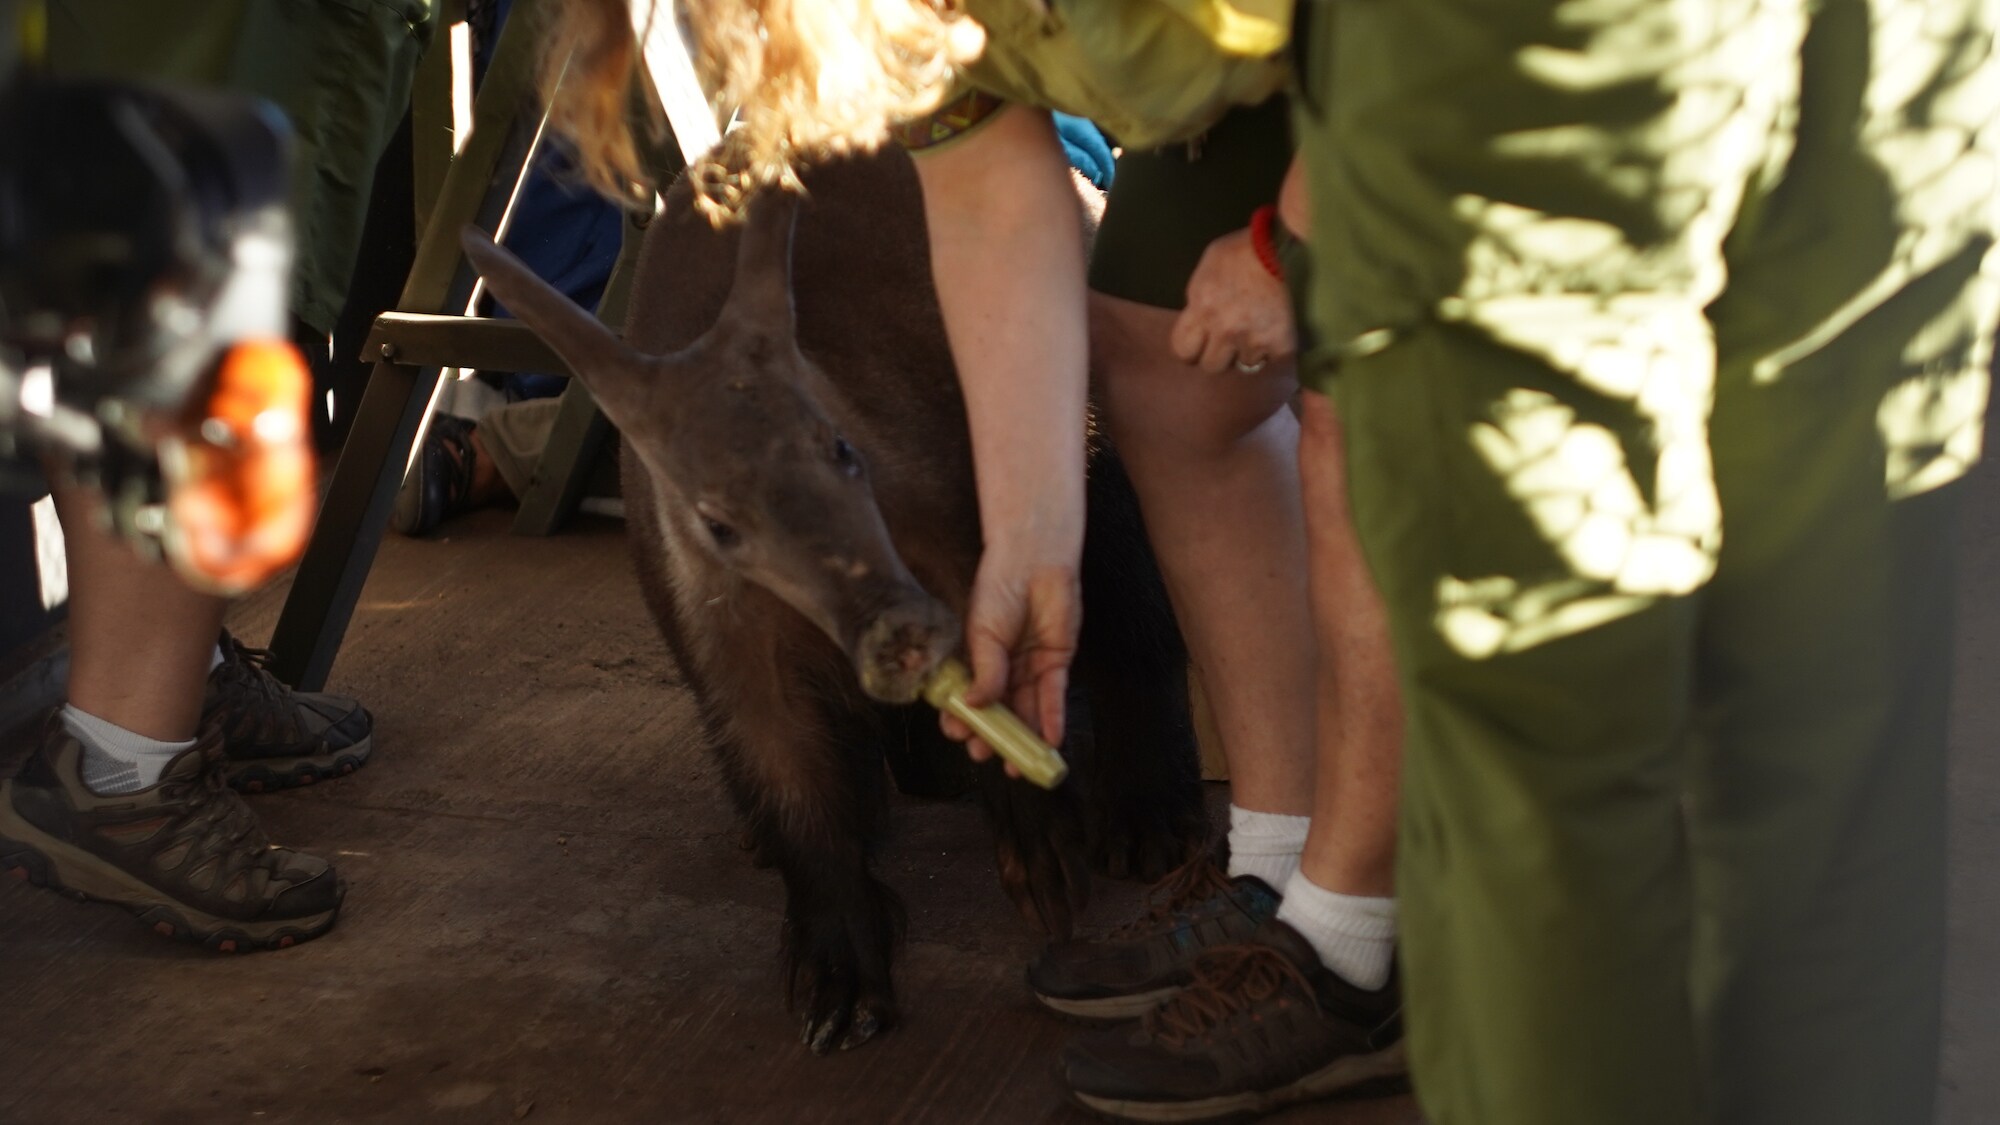 Peanut the aardvark is rewarded with a tasty snack after her ultrasound. (Disney)